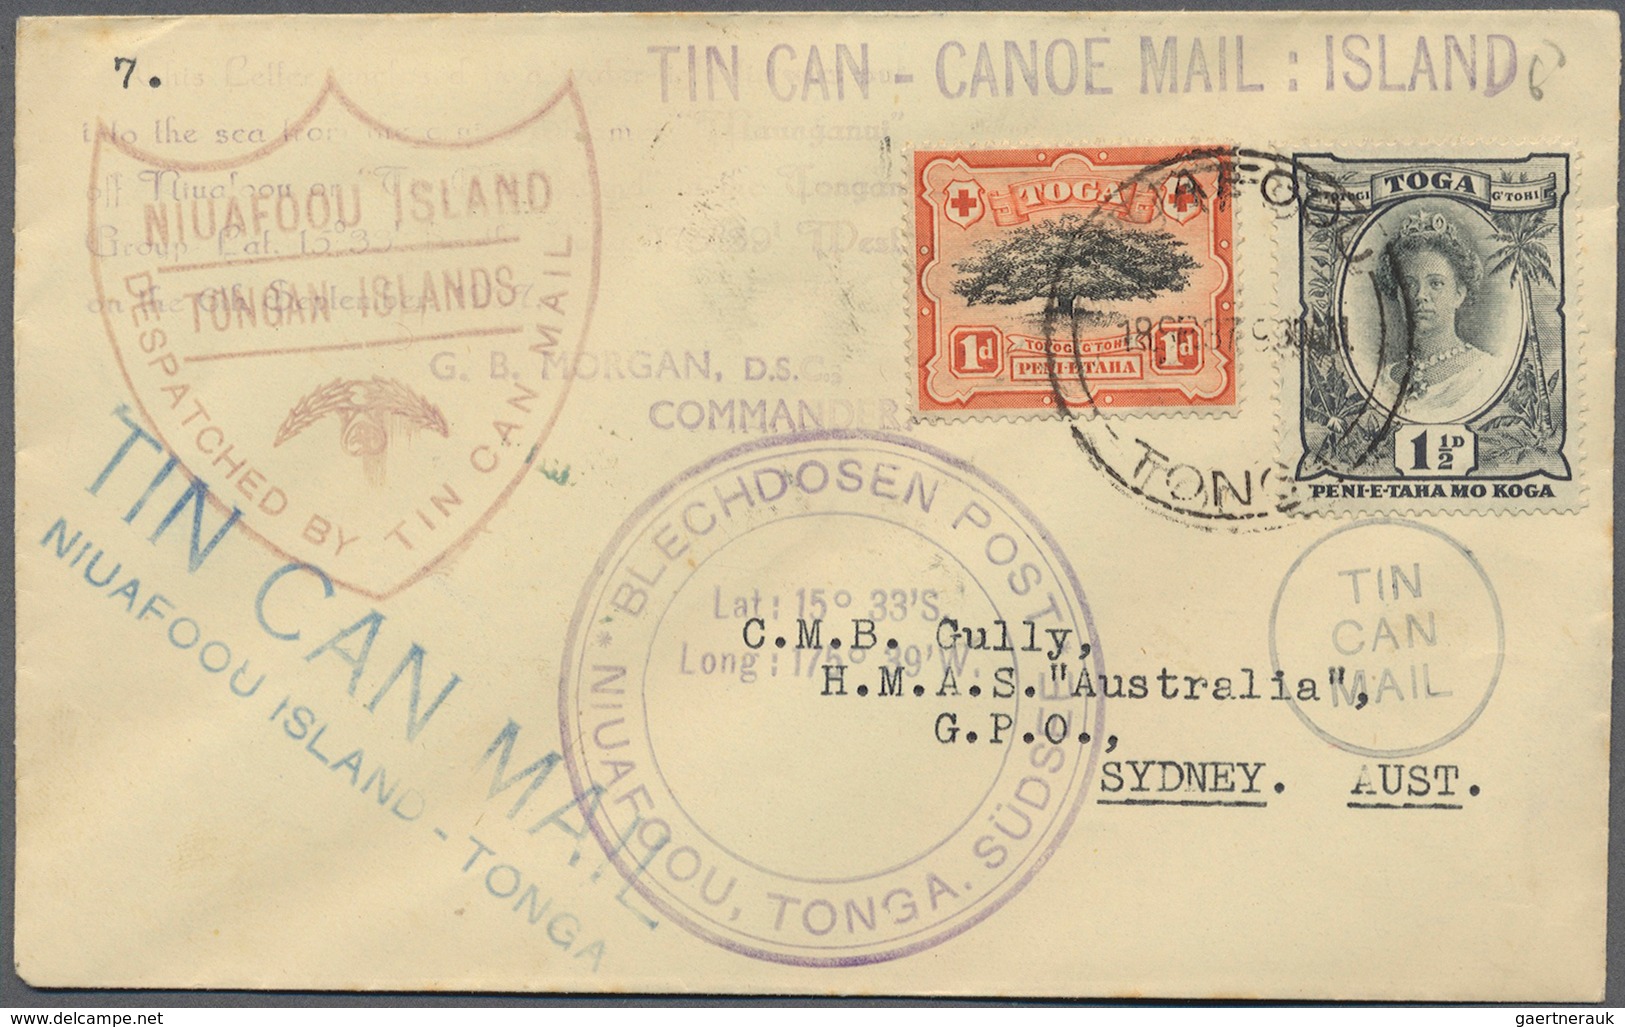 Tonga: 1900/2005, collection of apprx. 400 covers and cards, housed in 4 albums, comprising a surpri